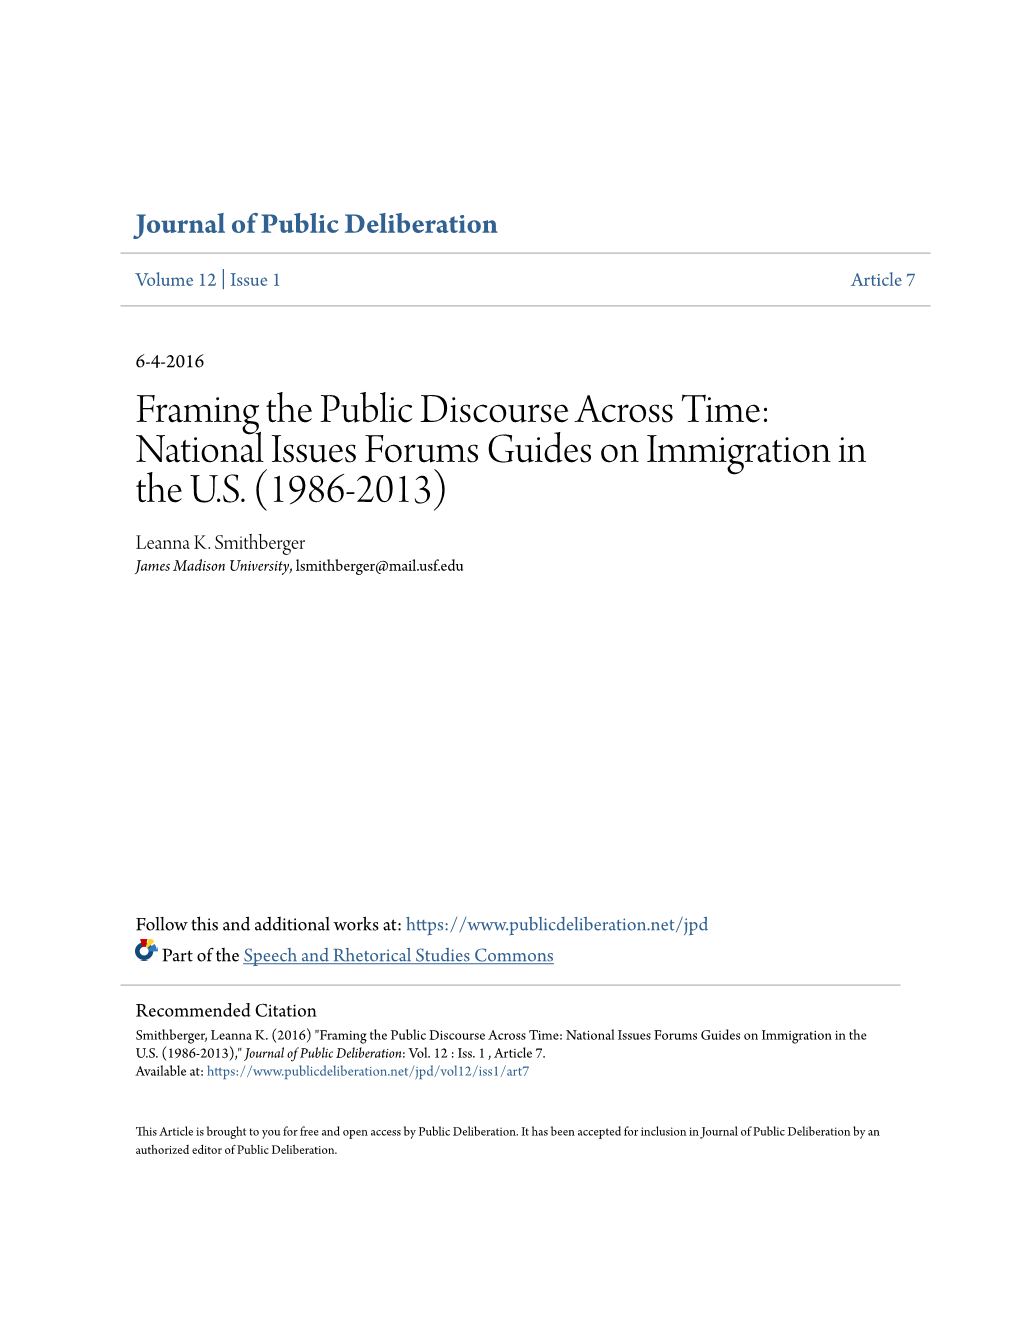 Framing the Public Discourse Across Time: National Issues Forums Guides on Immigration in the U.S